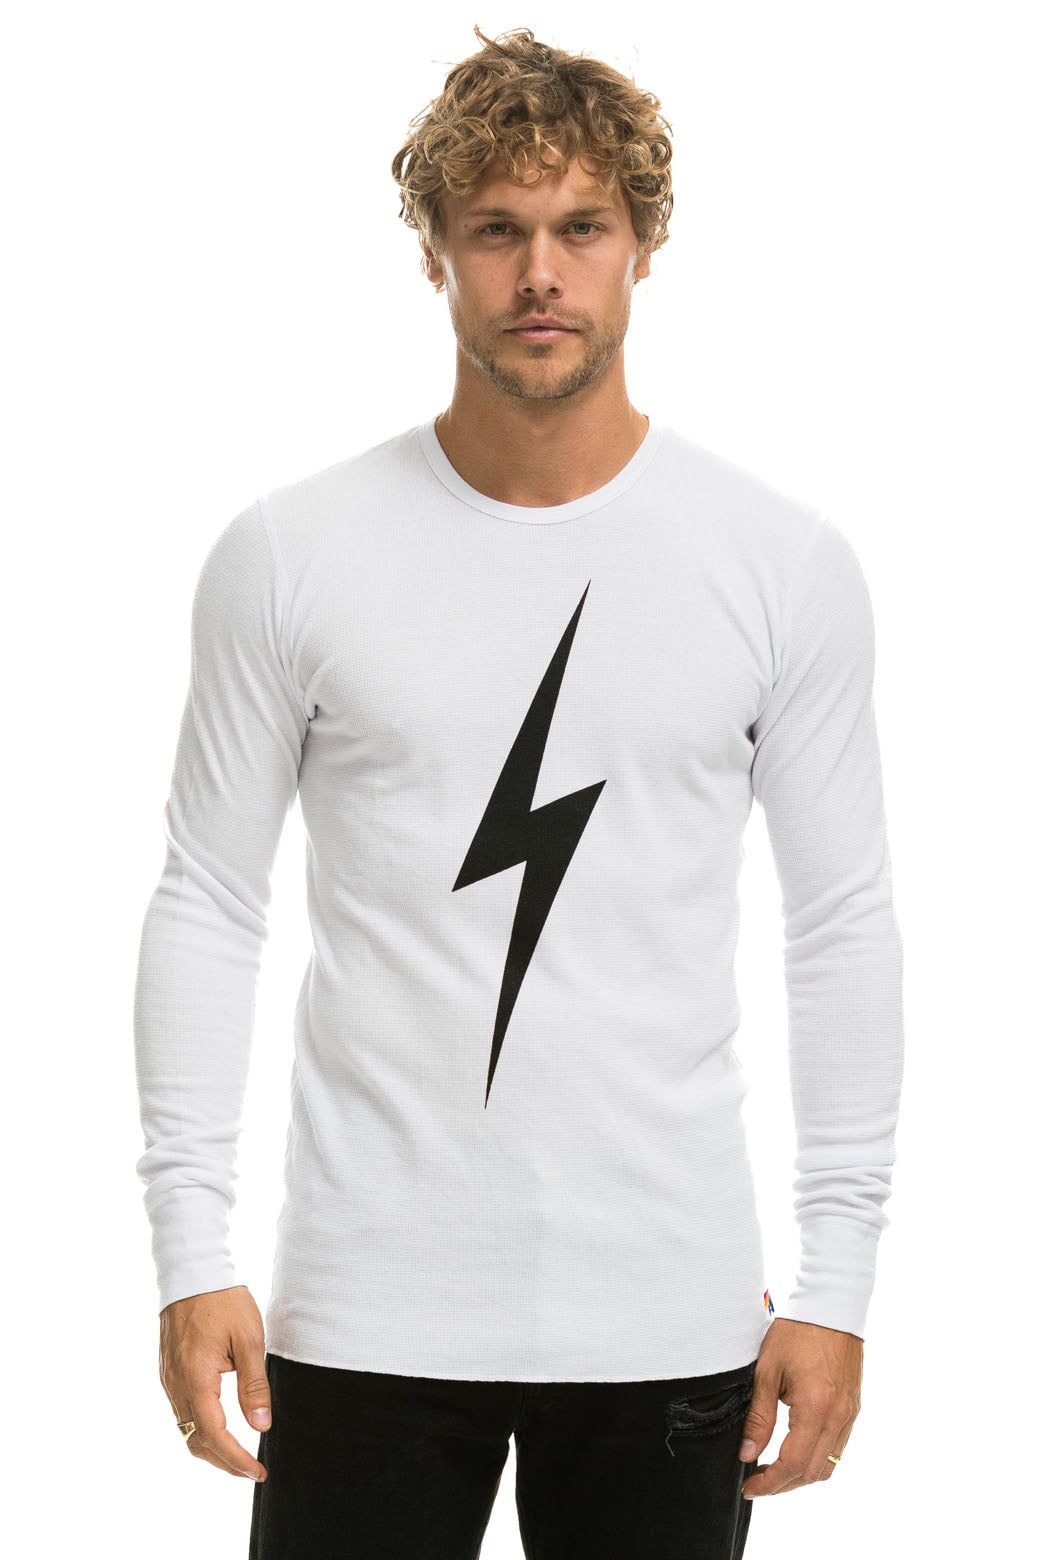 BOLT THERMAL - WHITE Thermal Aviator Nation 